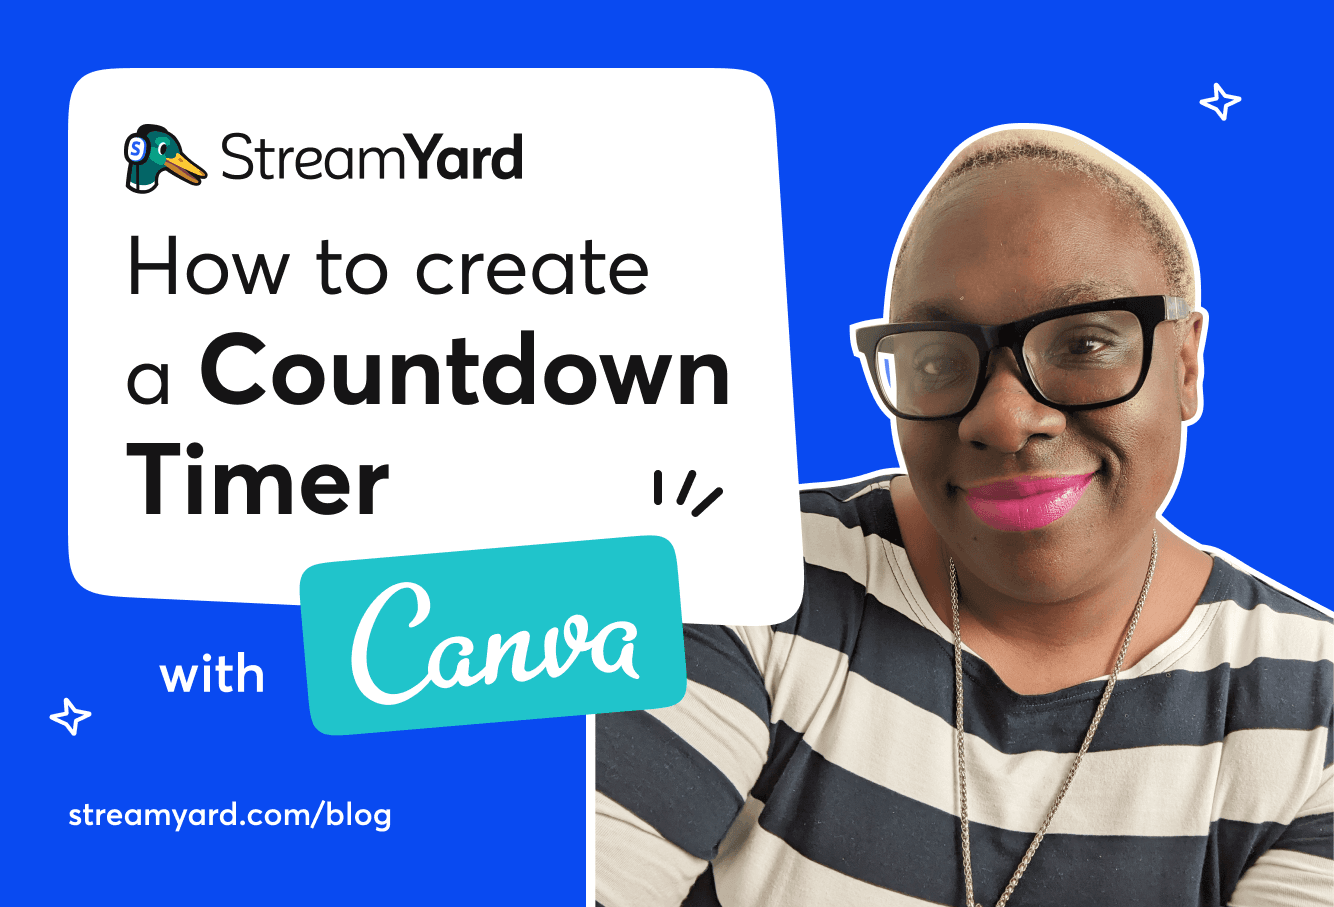 Learn how to create a countdown timer in Canva for live streaming. Also, find out how to upload your countdown timer to StreamYard.